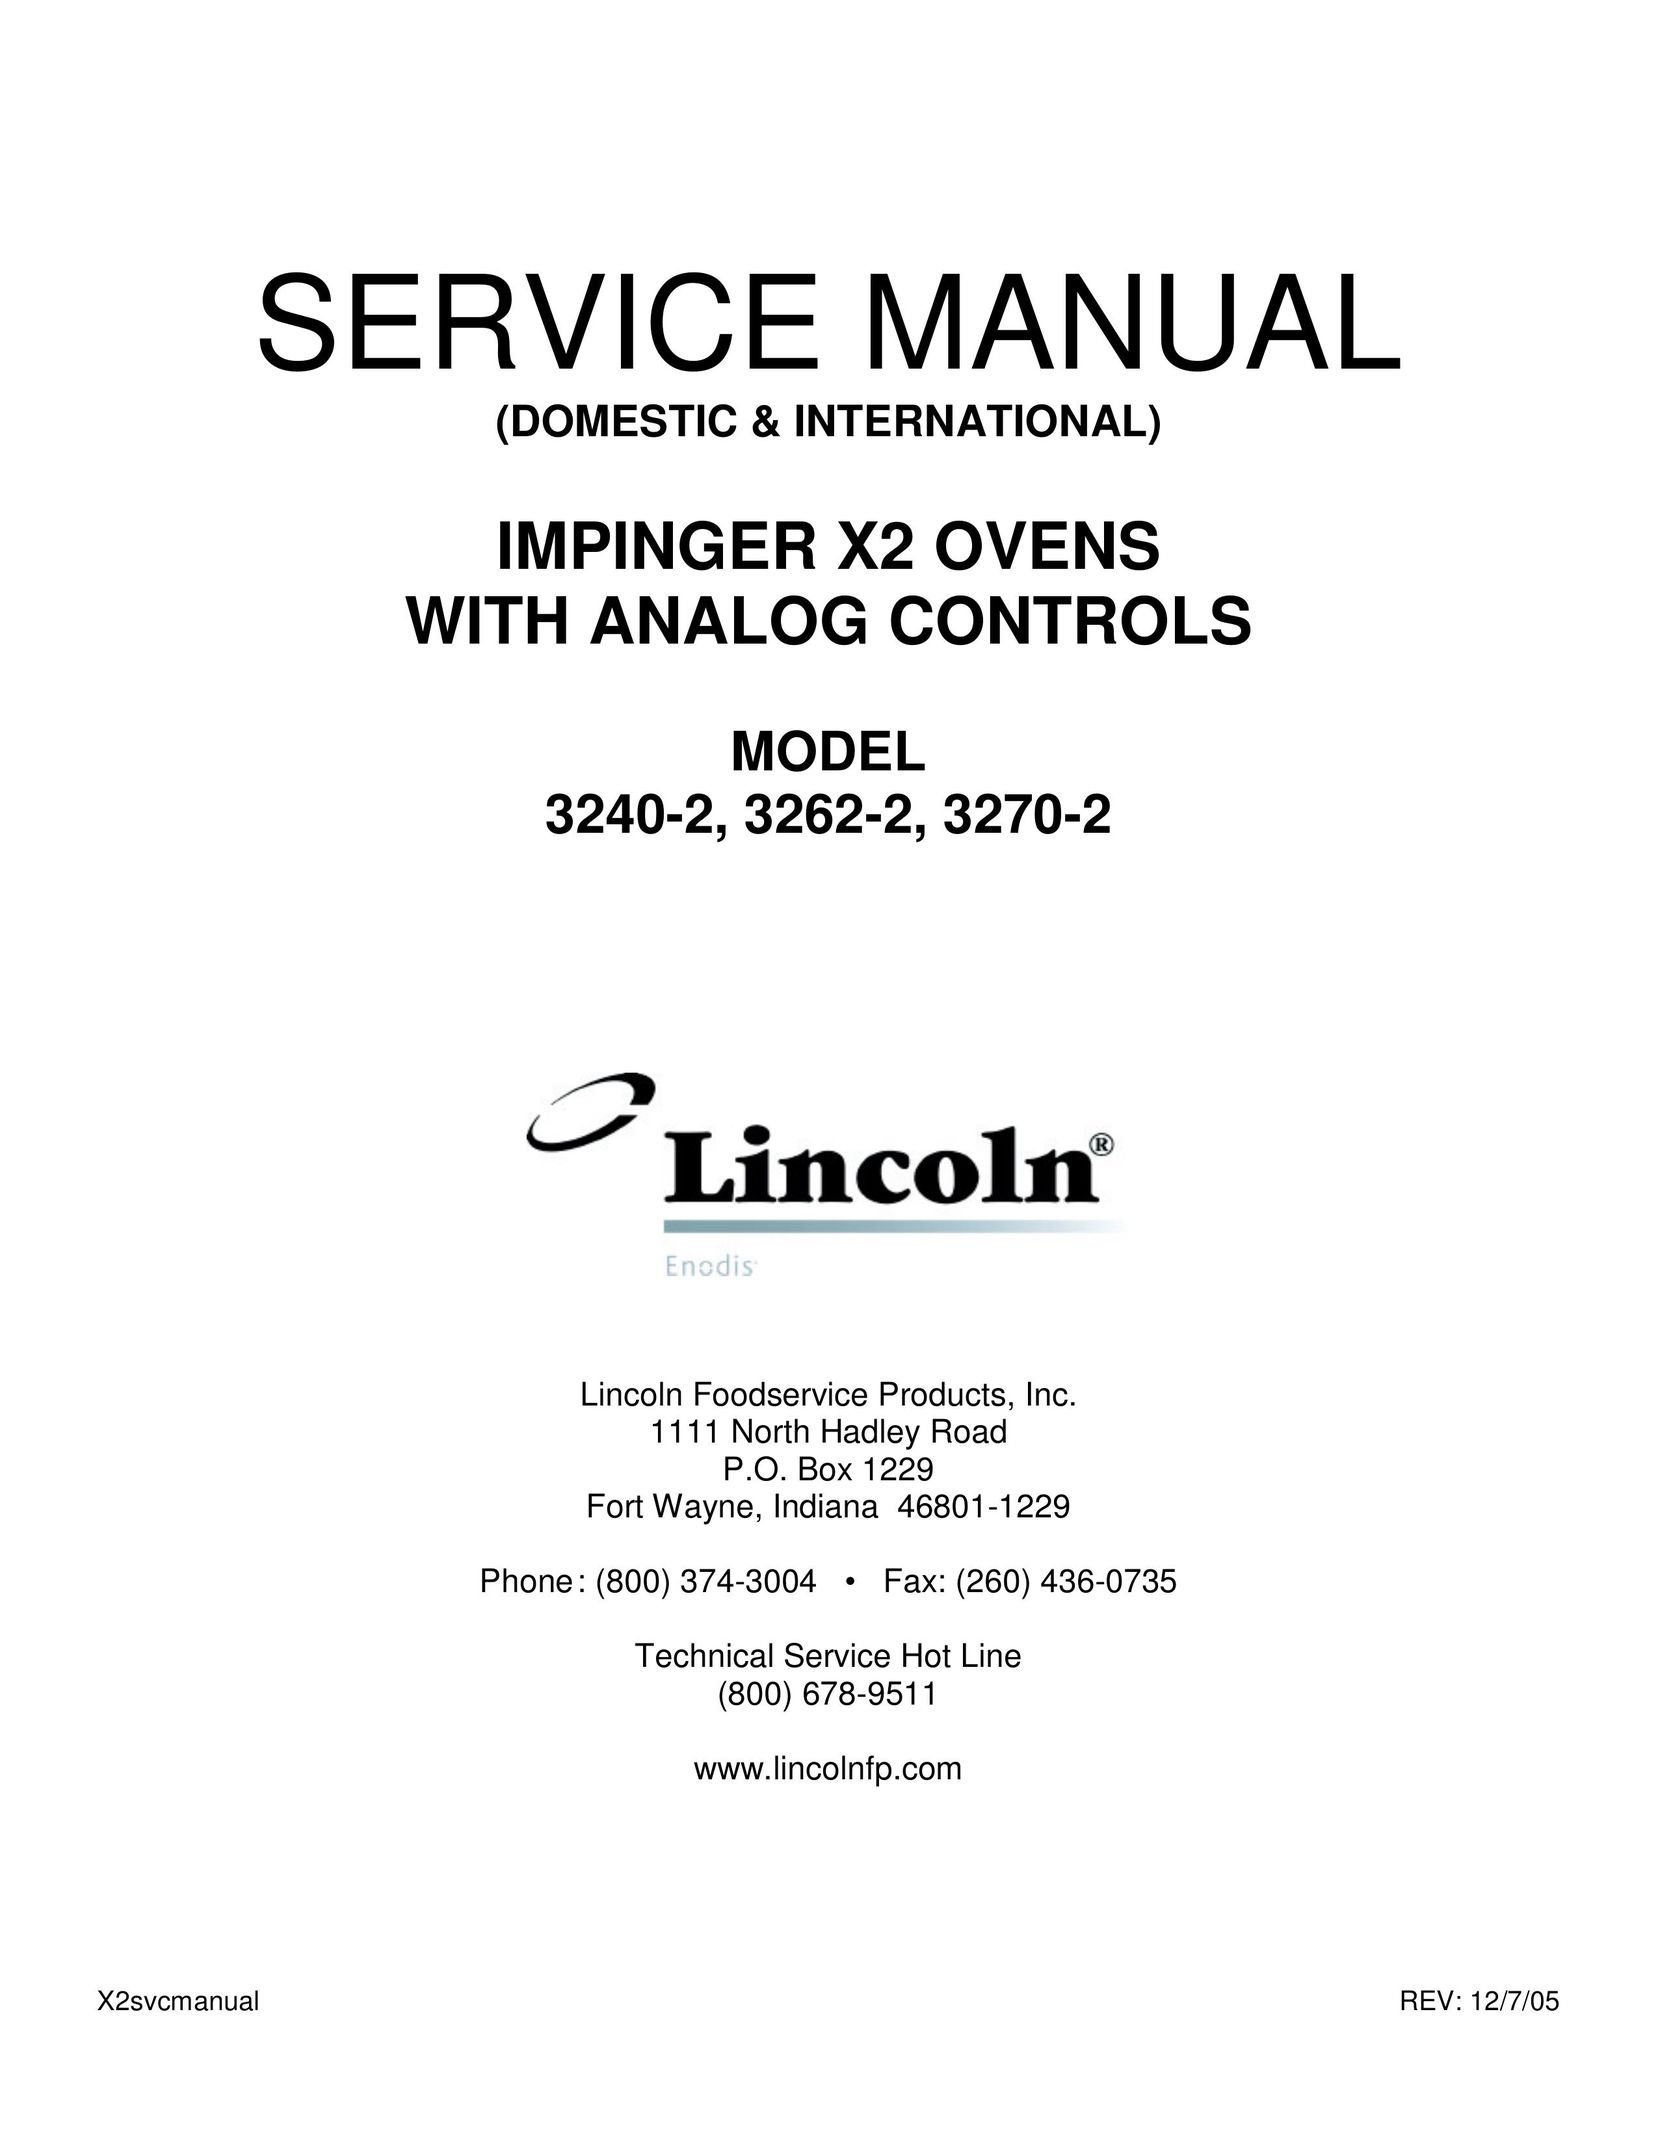 Lincoln 3240-2 Double Oven User Manual